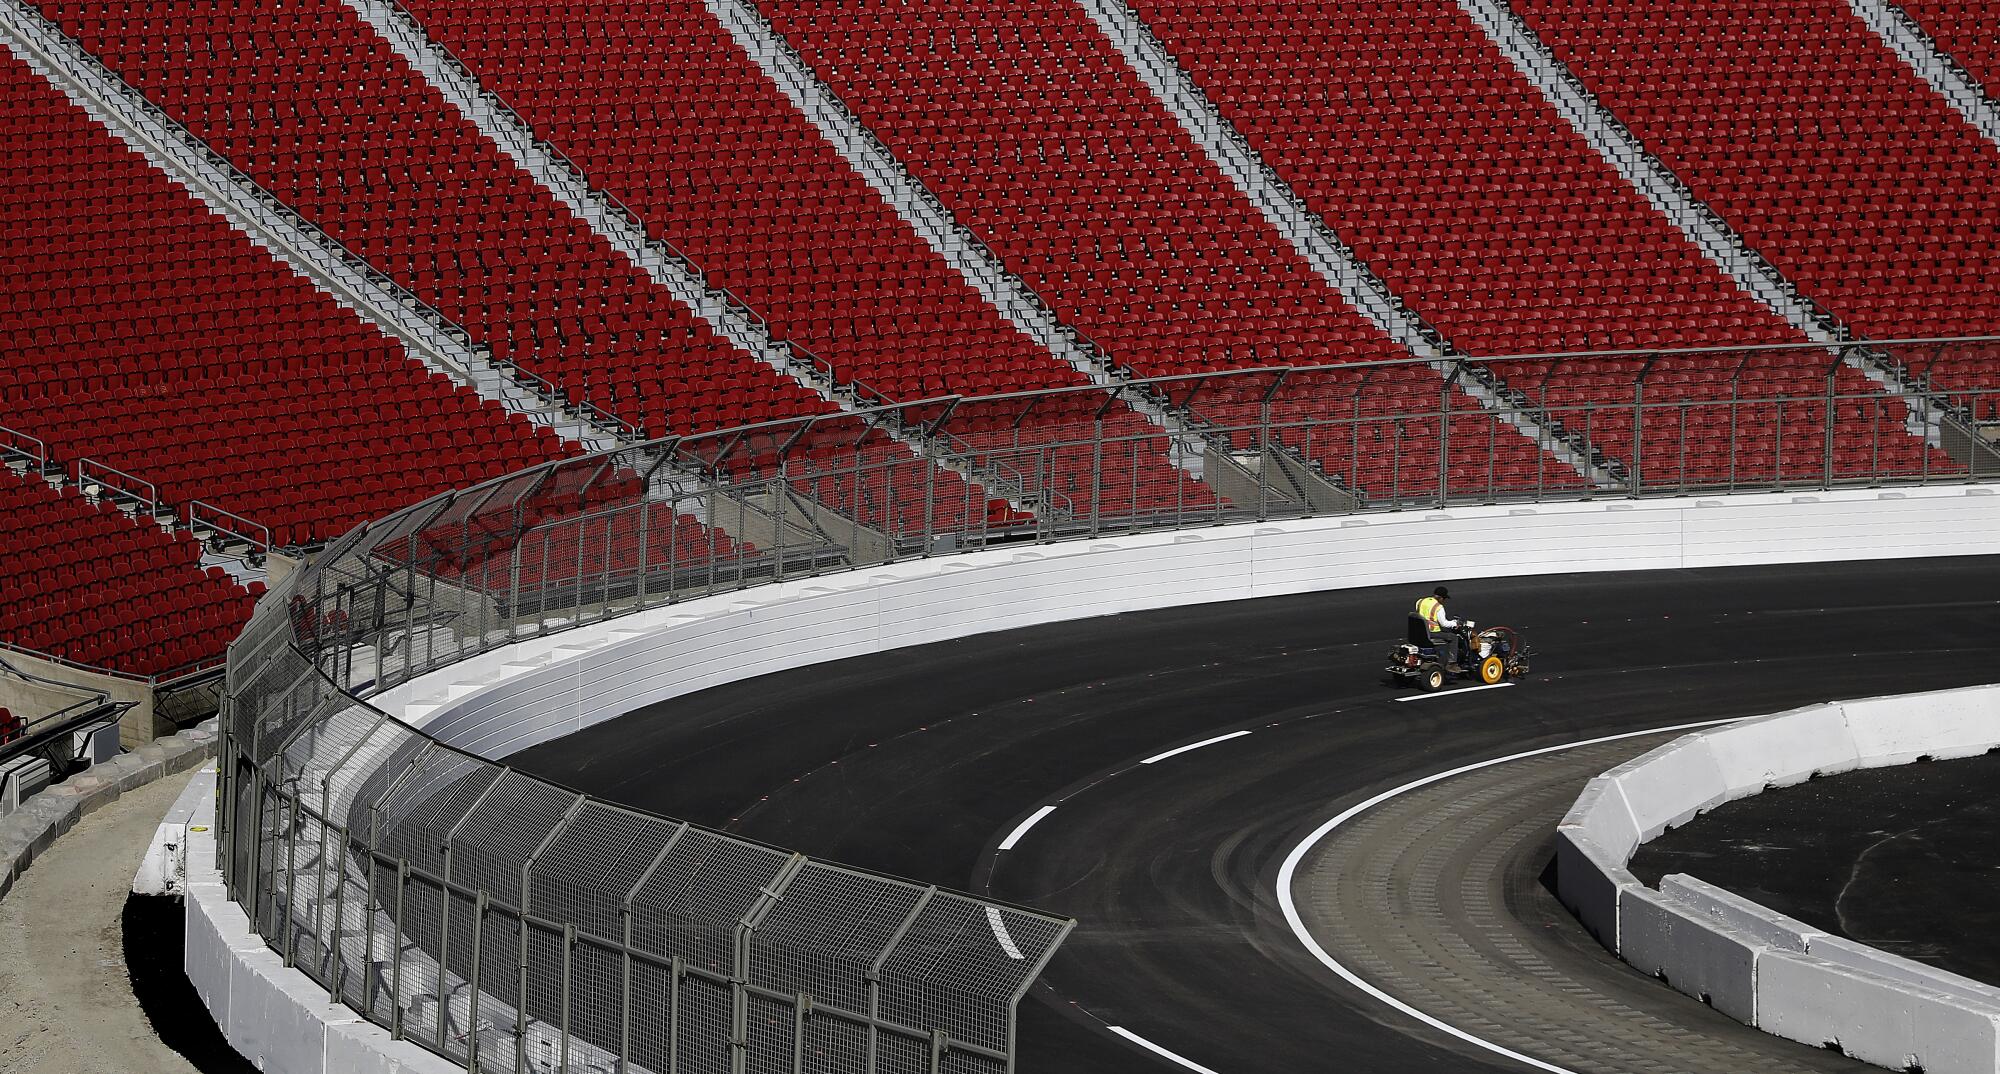 Lane lines are painted ahead of the NASCAR race at the L.A. Memorial Coliseum.